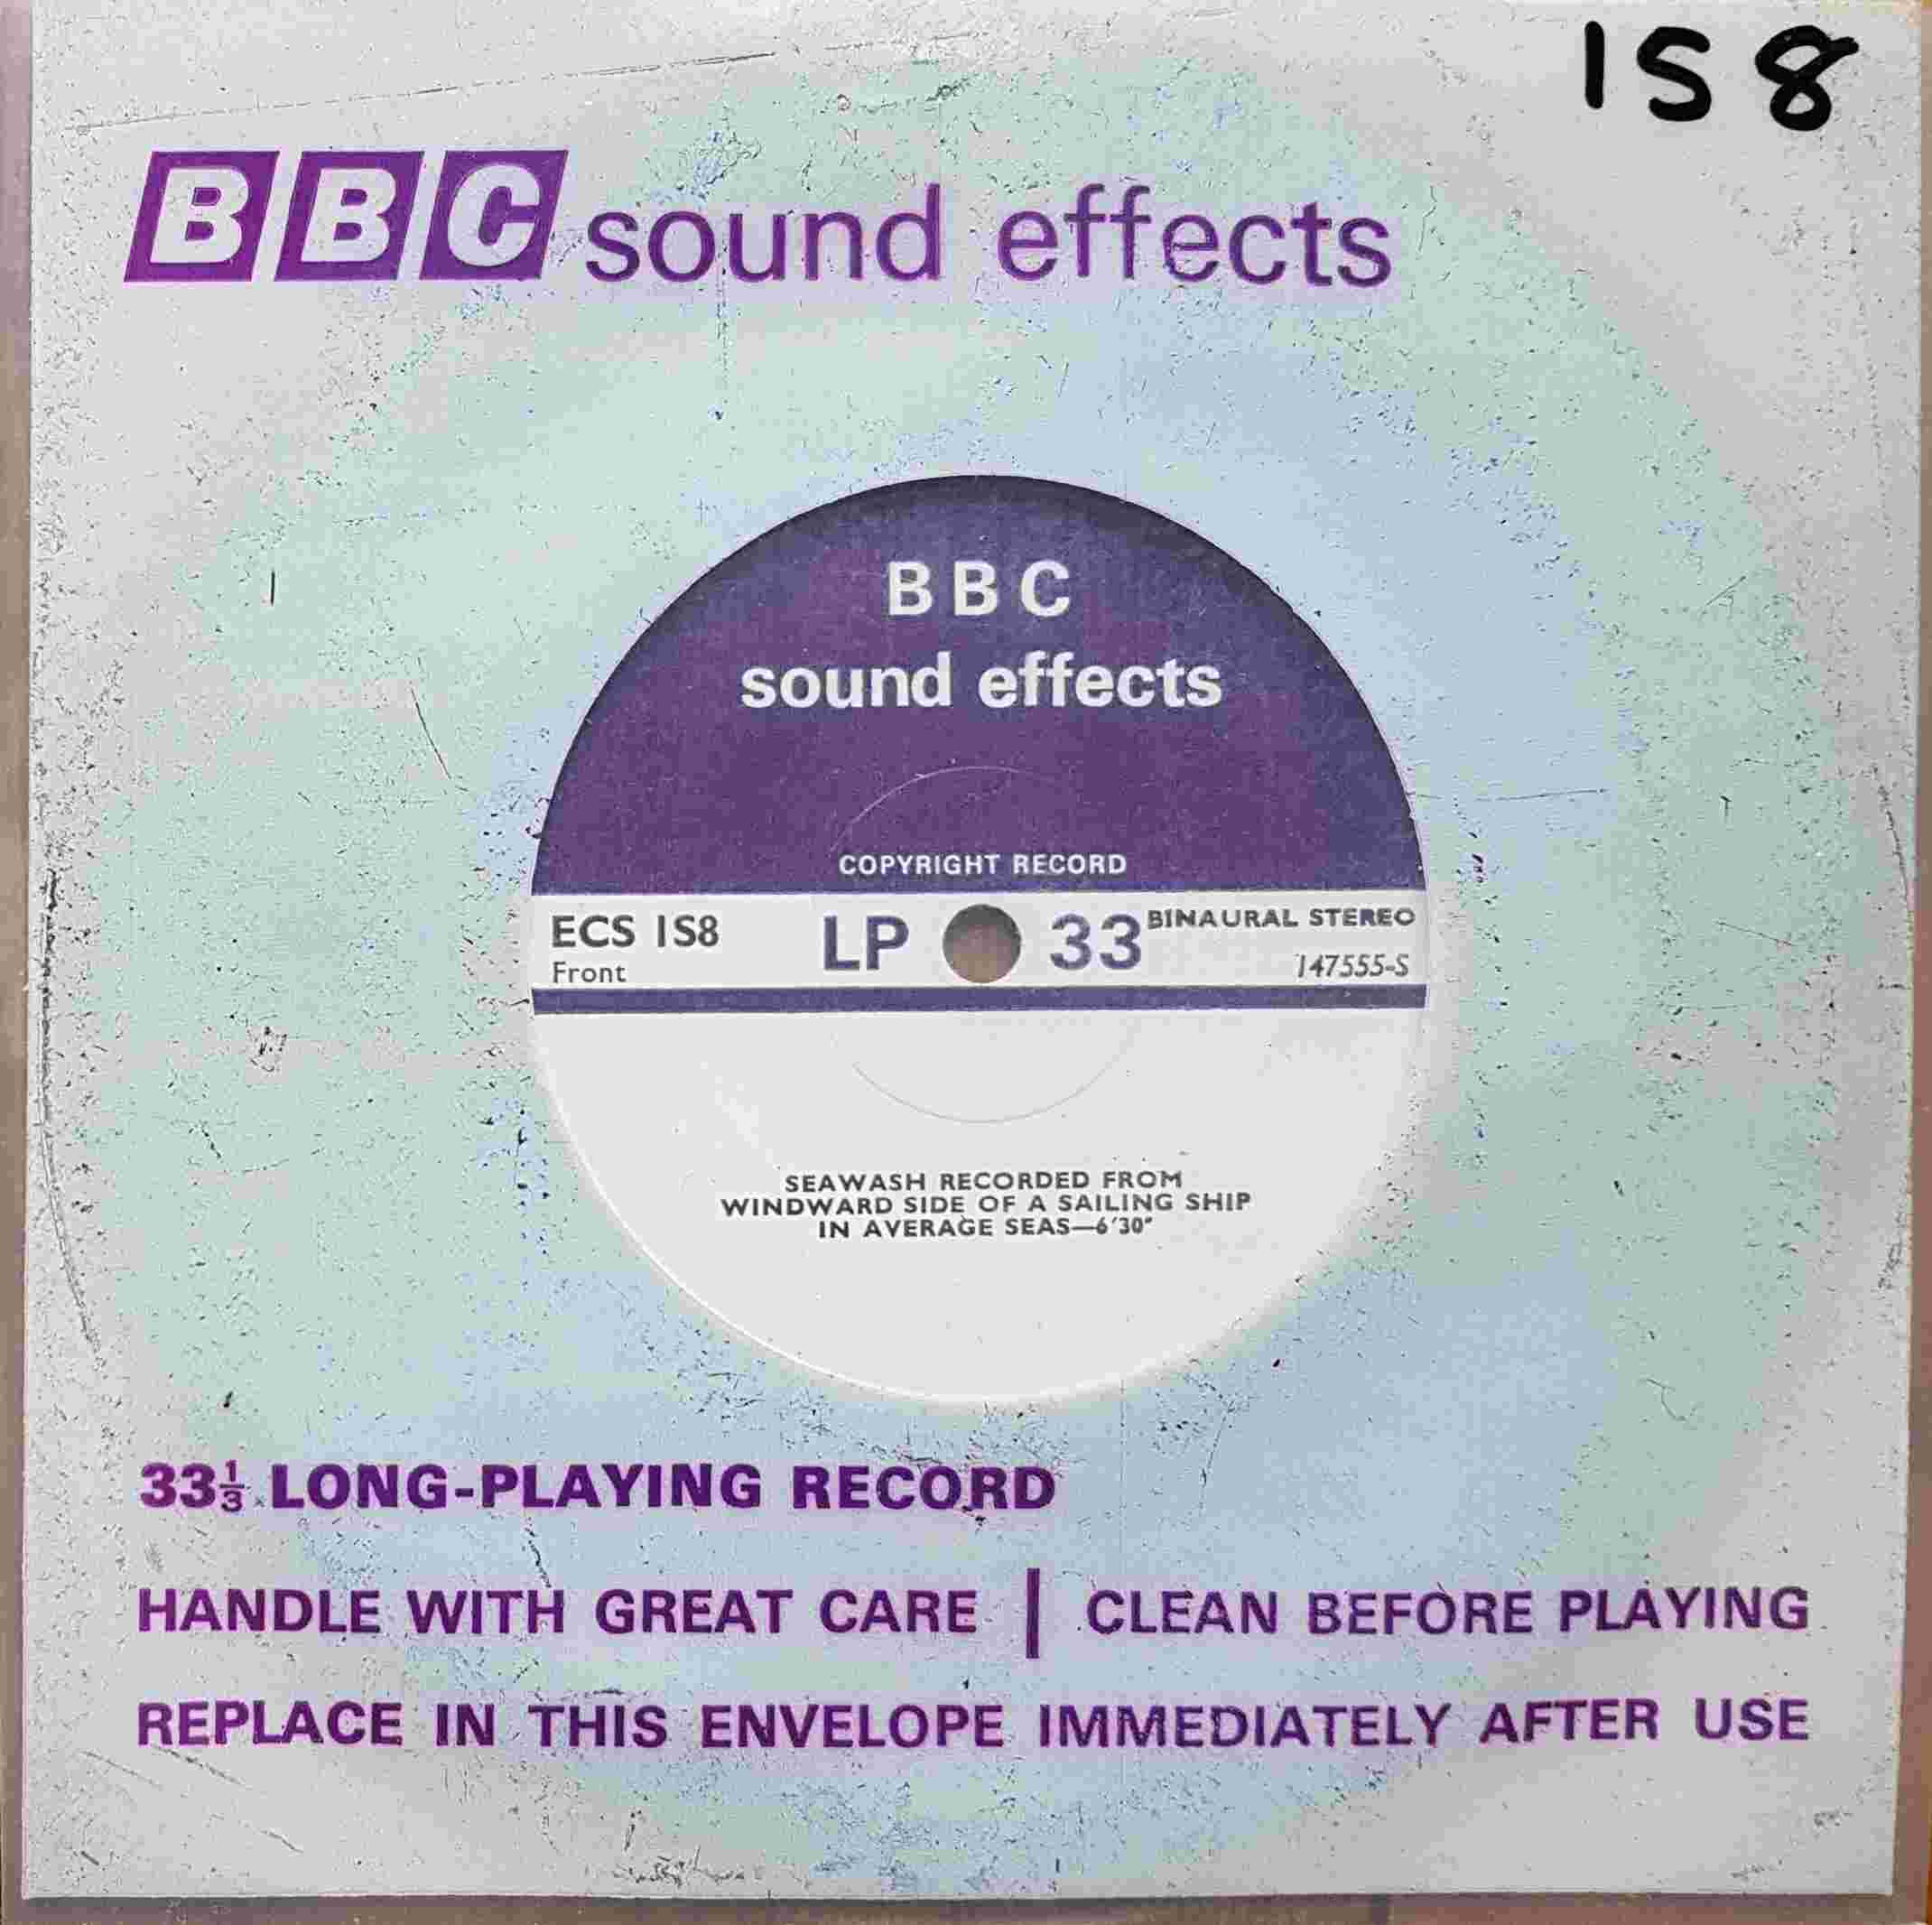 Picture of ECS 1S8 Seawash / Heavy surf and waves by artist Not registered from the BBC singles - Records and Tapes library